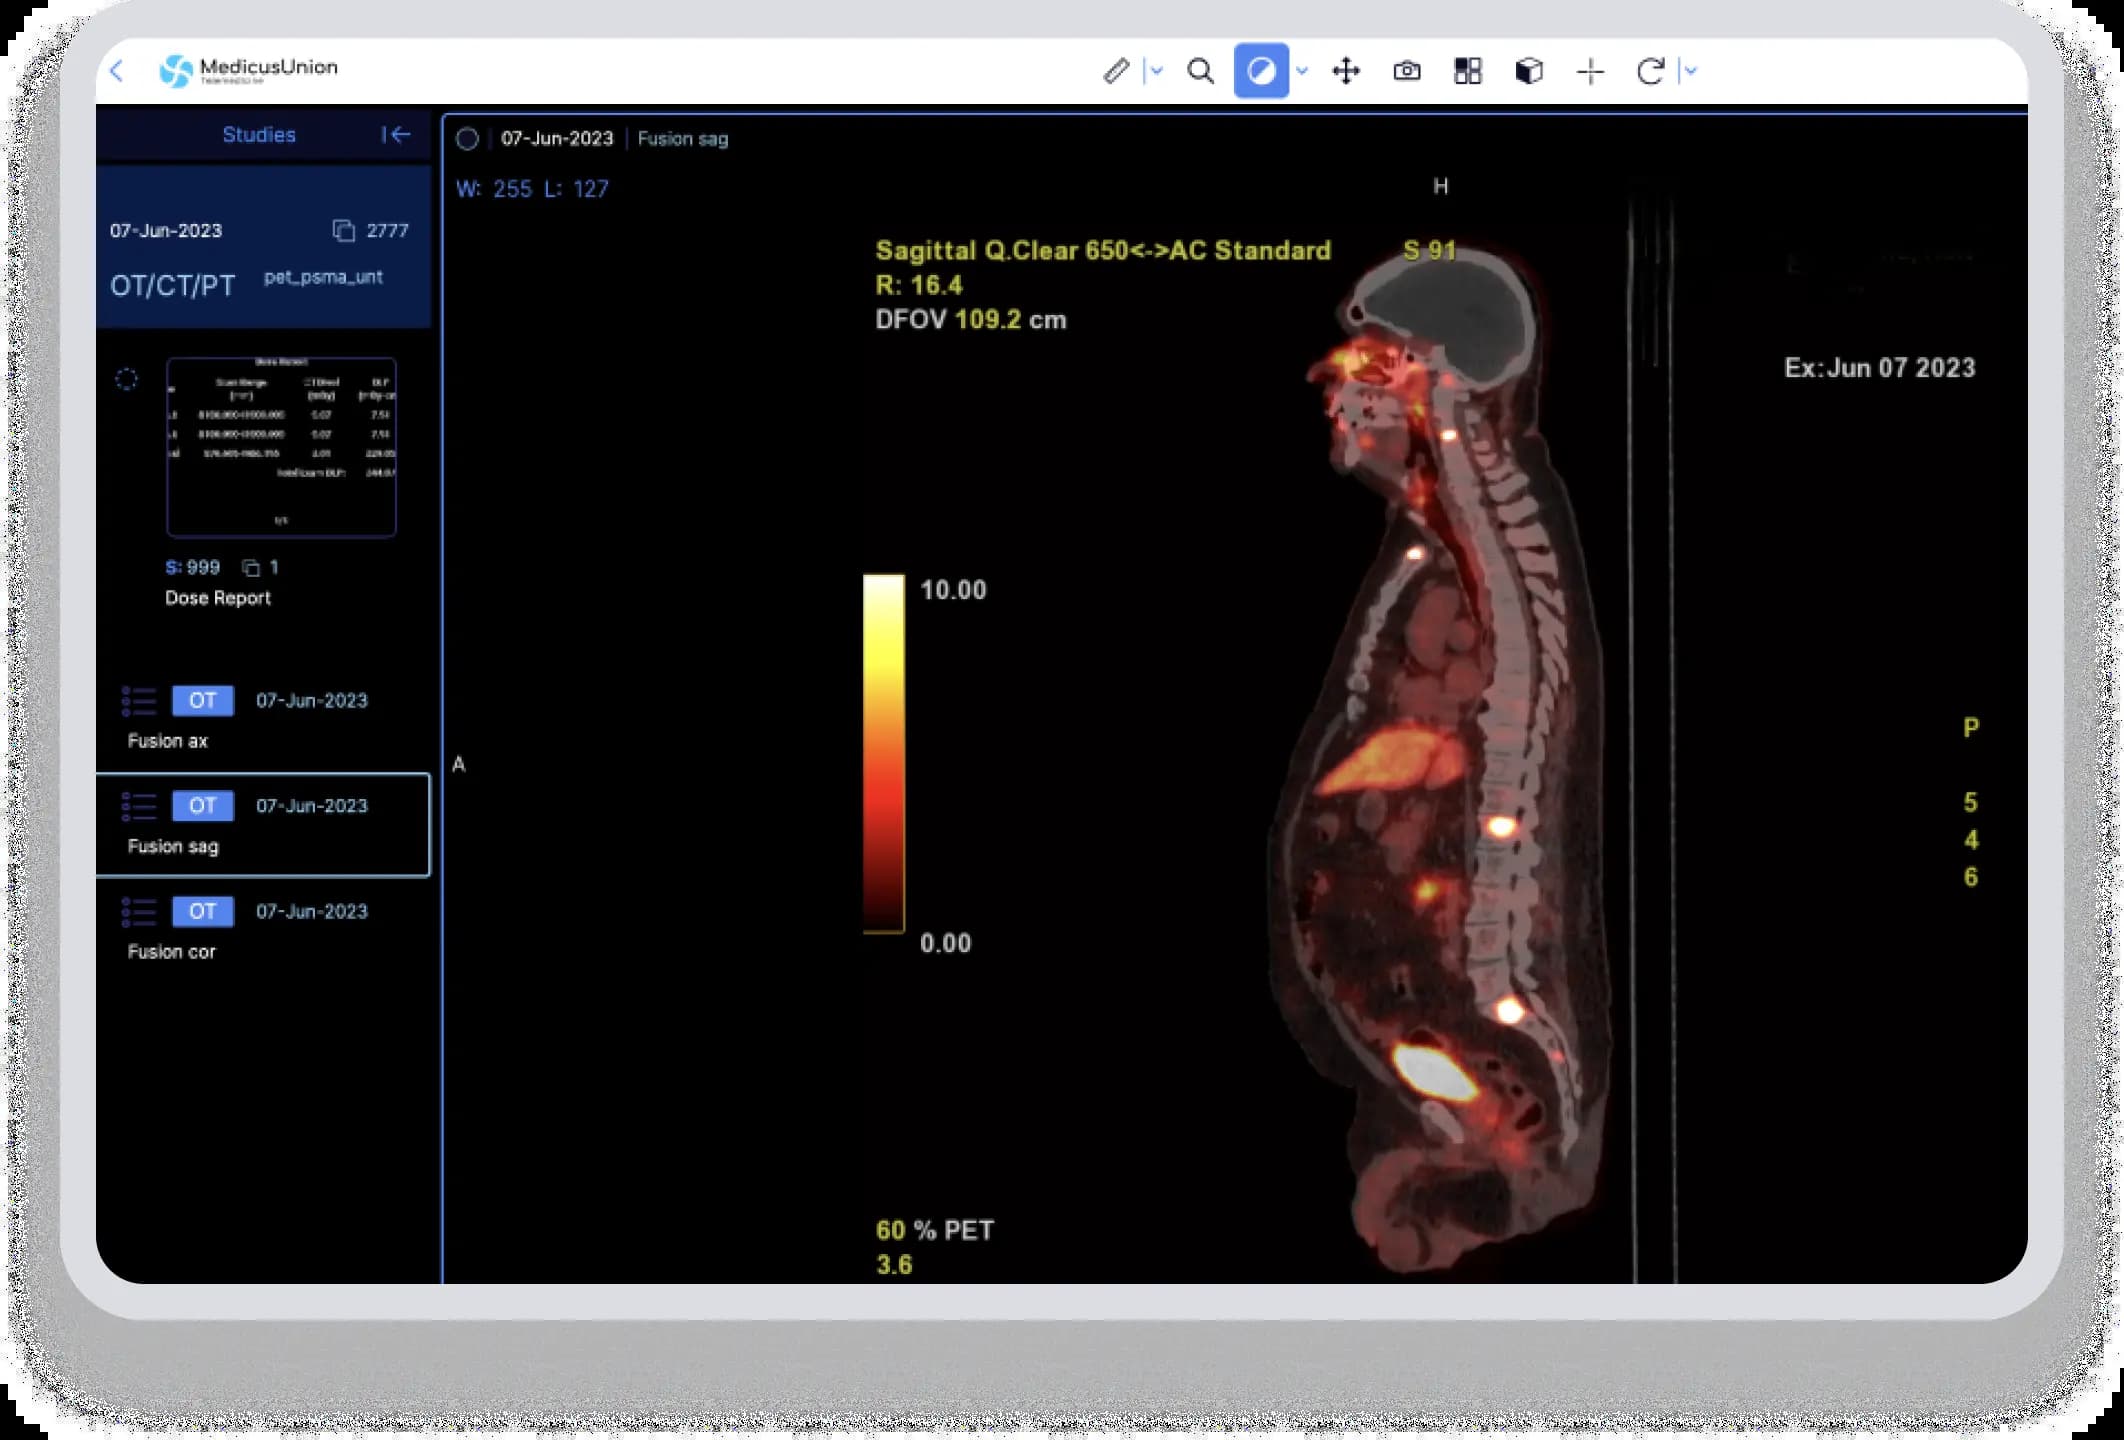 Access your medical records easily with MedicusUnion's DICOM Viewer.